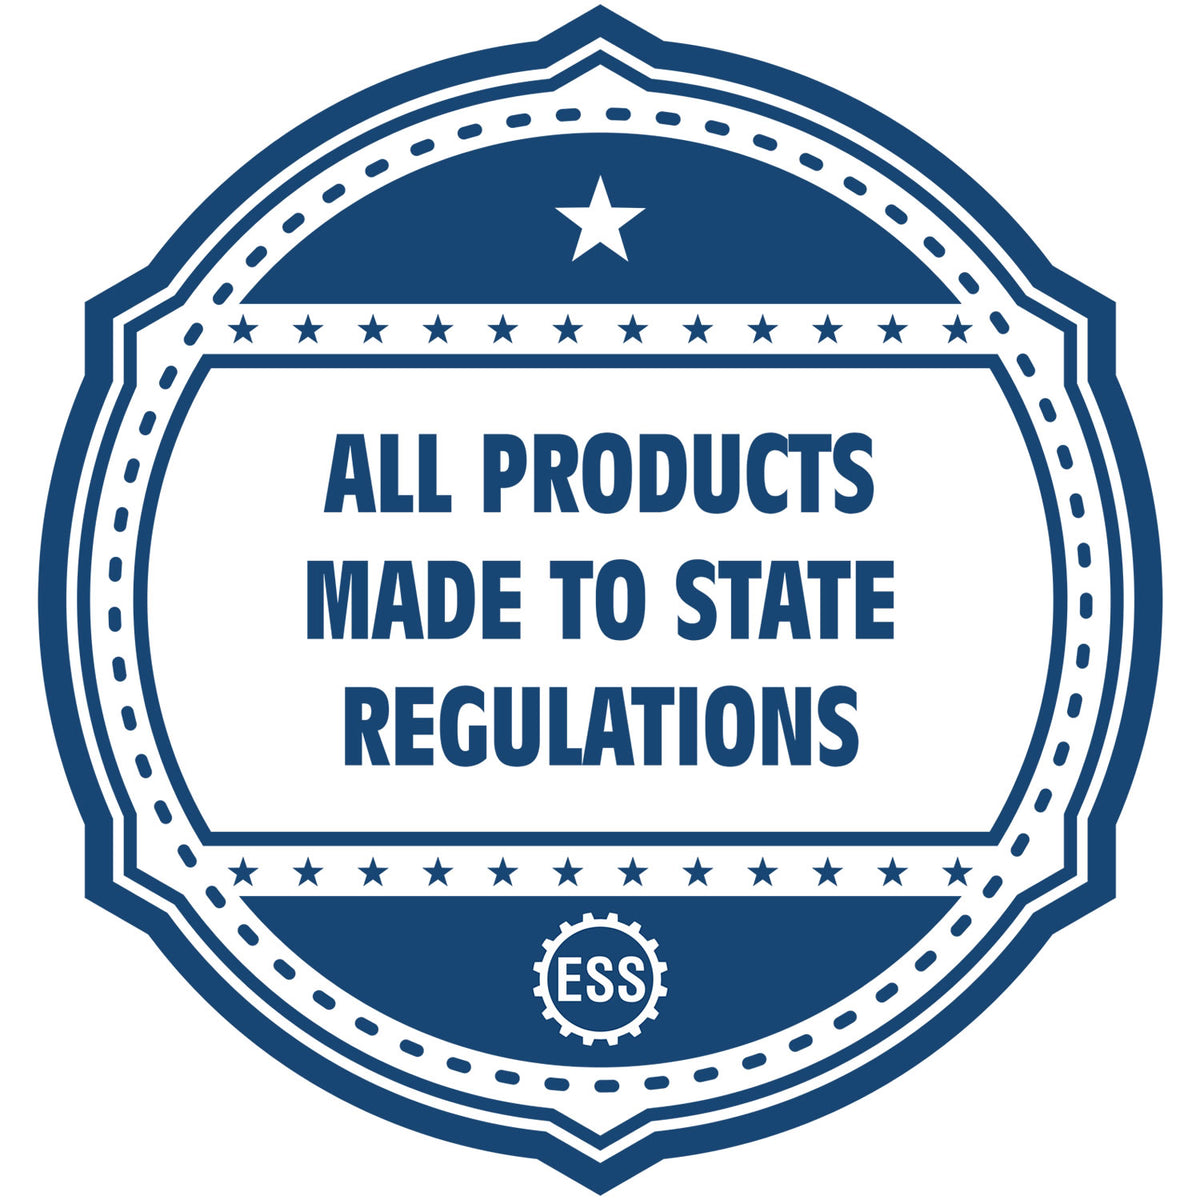 An icon or badge element for the Self-Inking New York Landscape Architect Stamp showing that this product is made in compliance with state regulations.